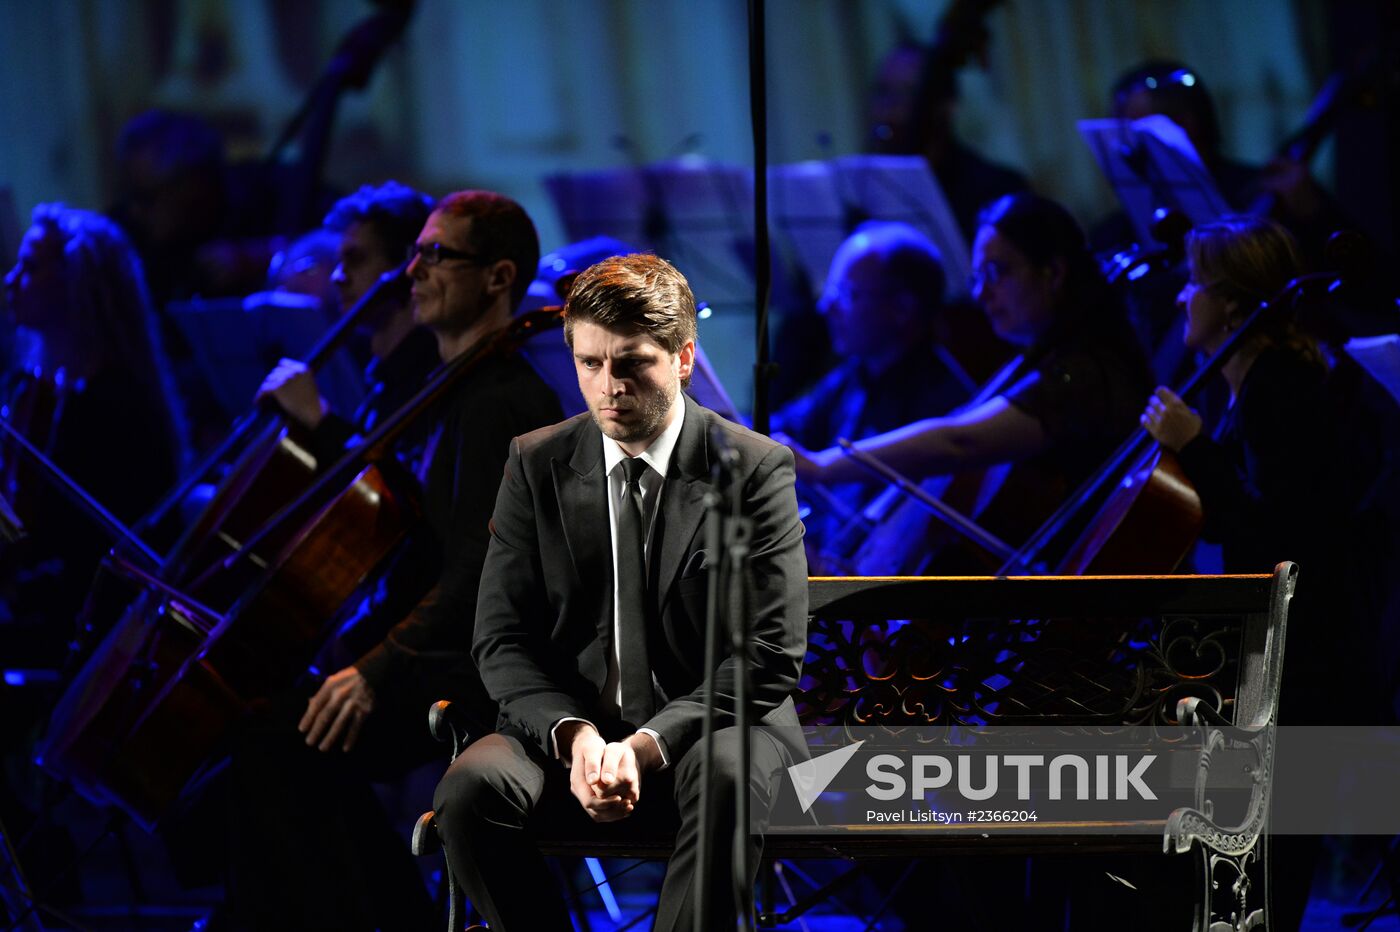 Literary-musical composition "Evgeny Onegin" at Winter Festival in Sochi